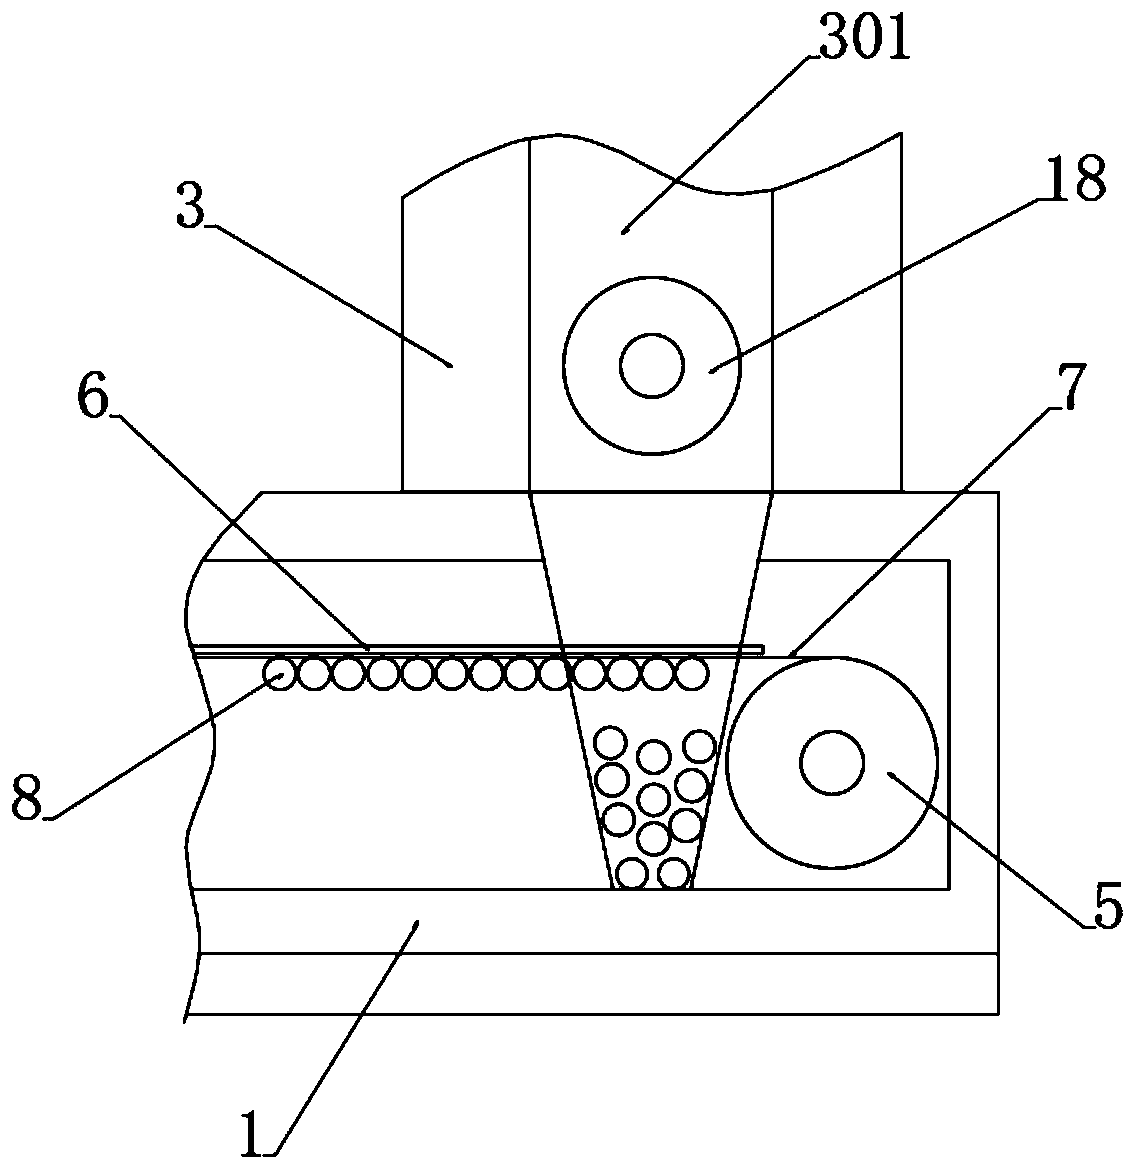 Embedded soil heavy metal adsorption and transfer device